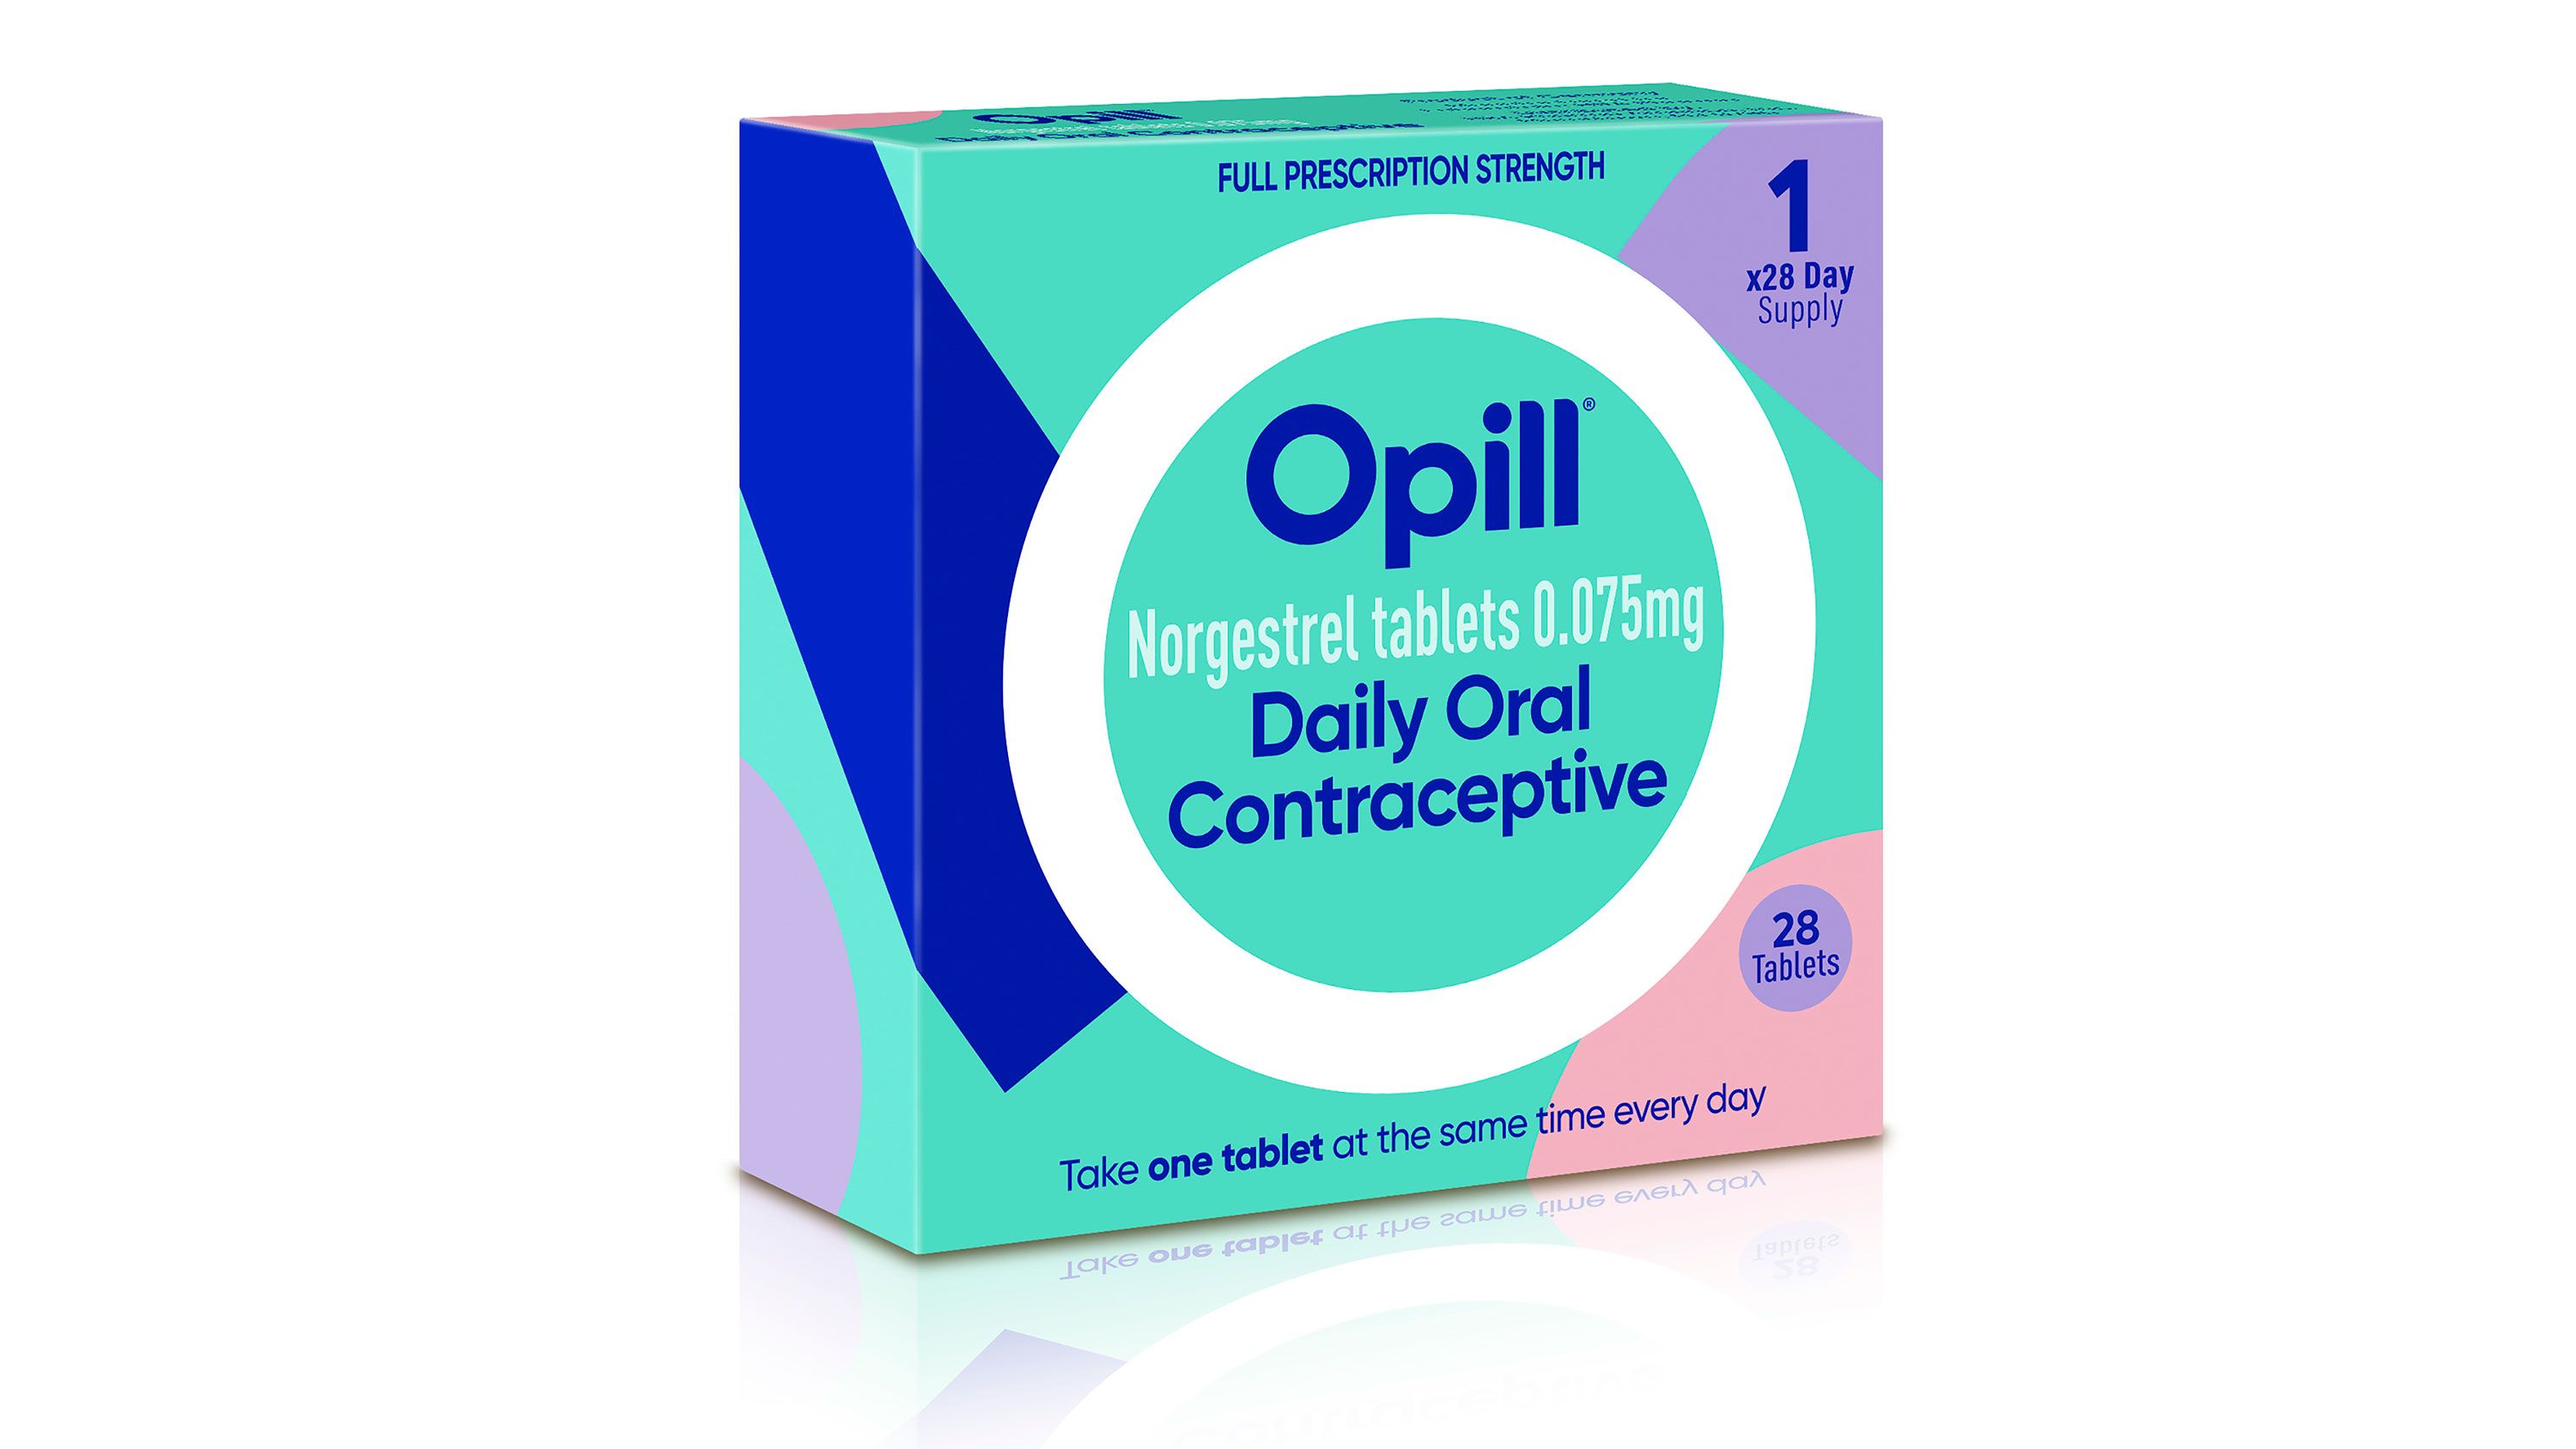 FILE - This illustration provided by Perrigo in May 2023, depicts proposed packaging for the company's birth control medication Opill. U.S. officials have approved the first over-the-counter birth control pill, a major change that will broaden access for women and teenagers. The Food and Drug Administration decision on Thursday, July 13, 2023 means drugmaker Perrigo can sell its once-a-day Opill without a prescription. (Perrigo via AP, File)